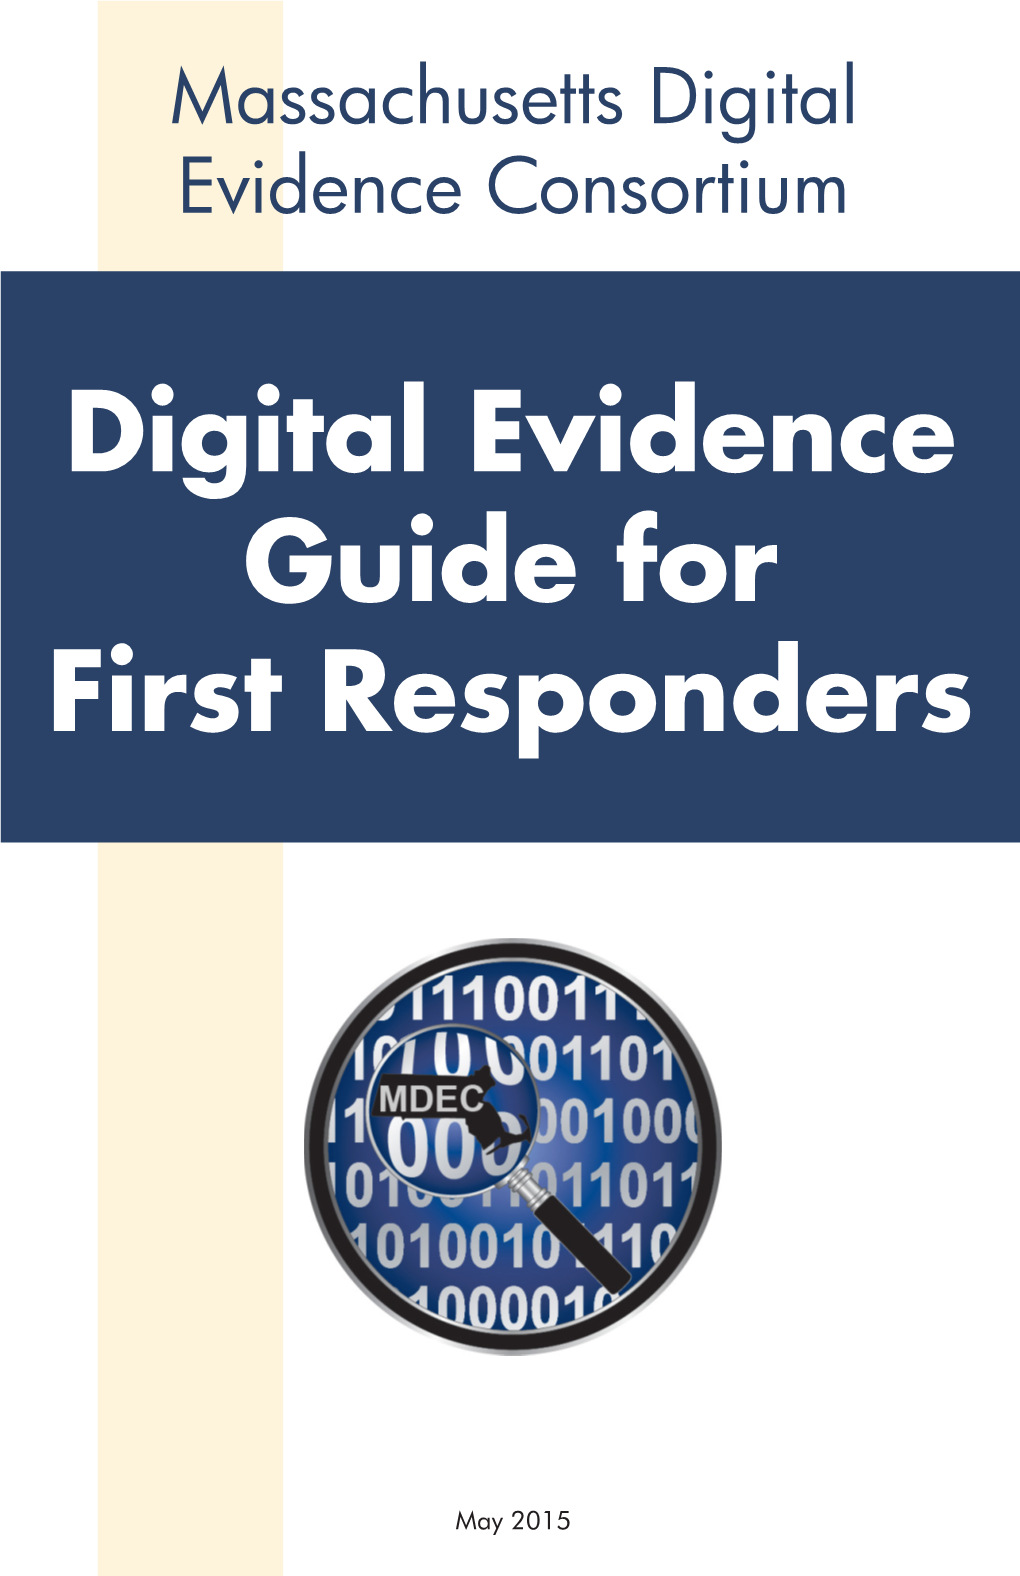 Digital Evidence Guide for First Responders